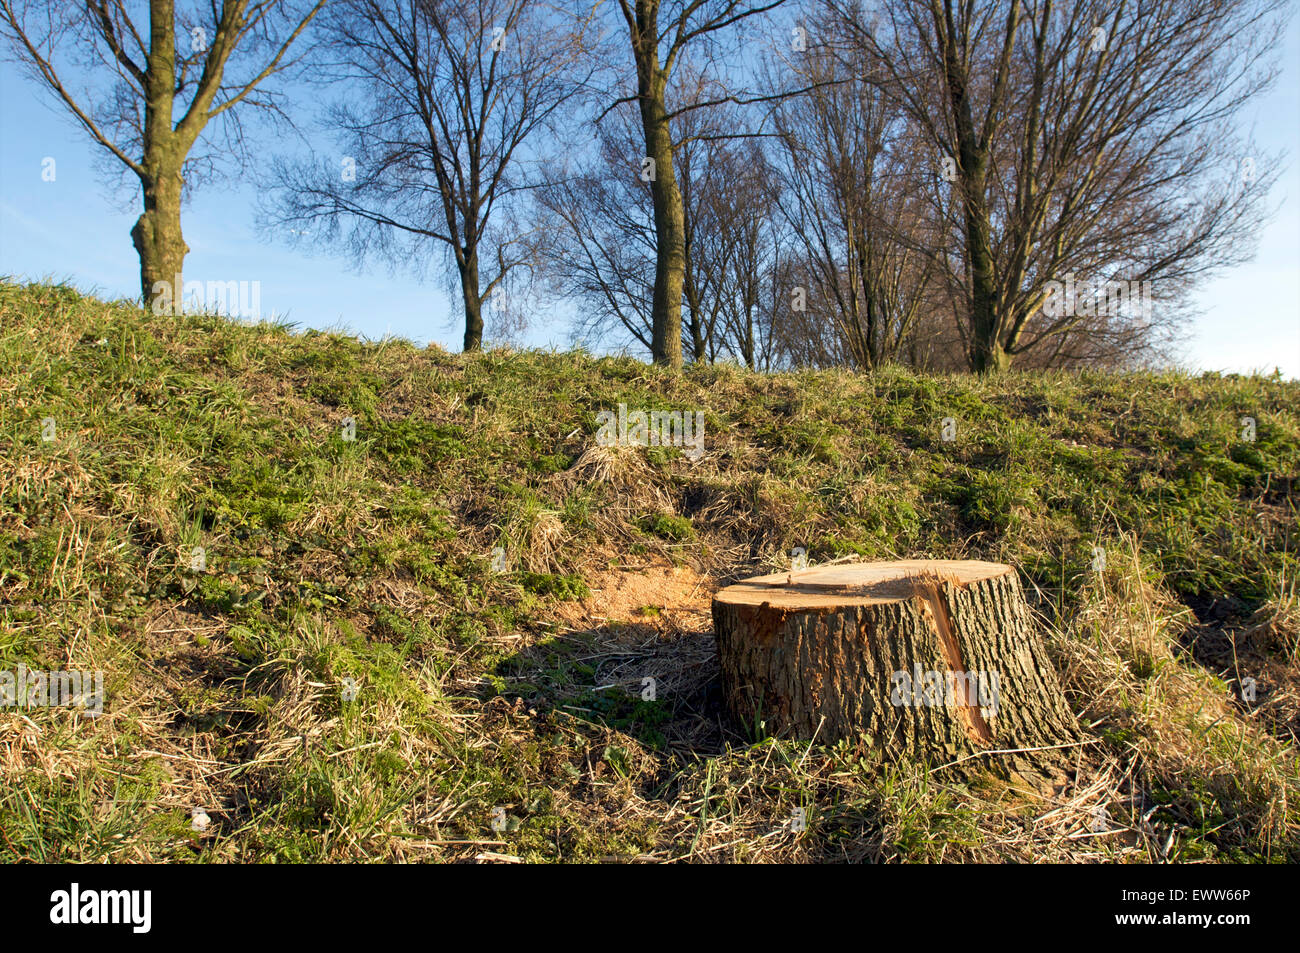 Sawed off tree trunk with full grown trees in the background during the autumn season Stock Photo